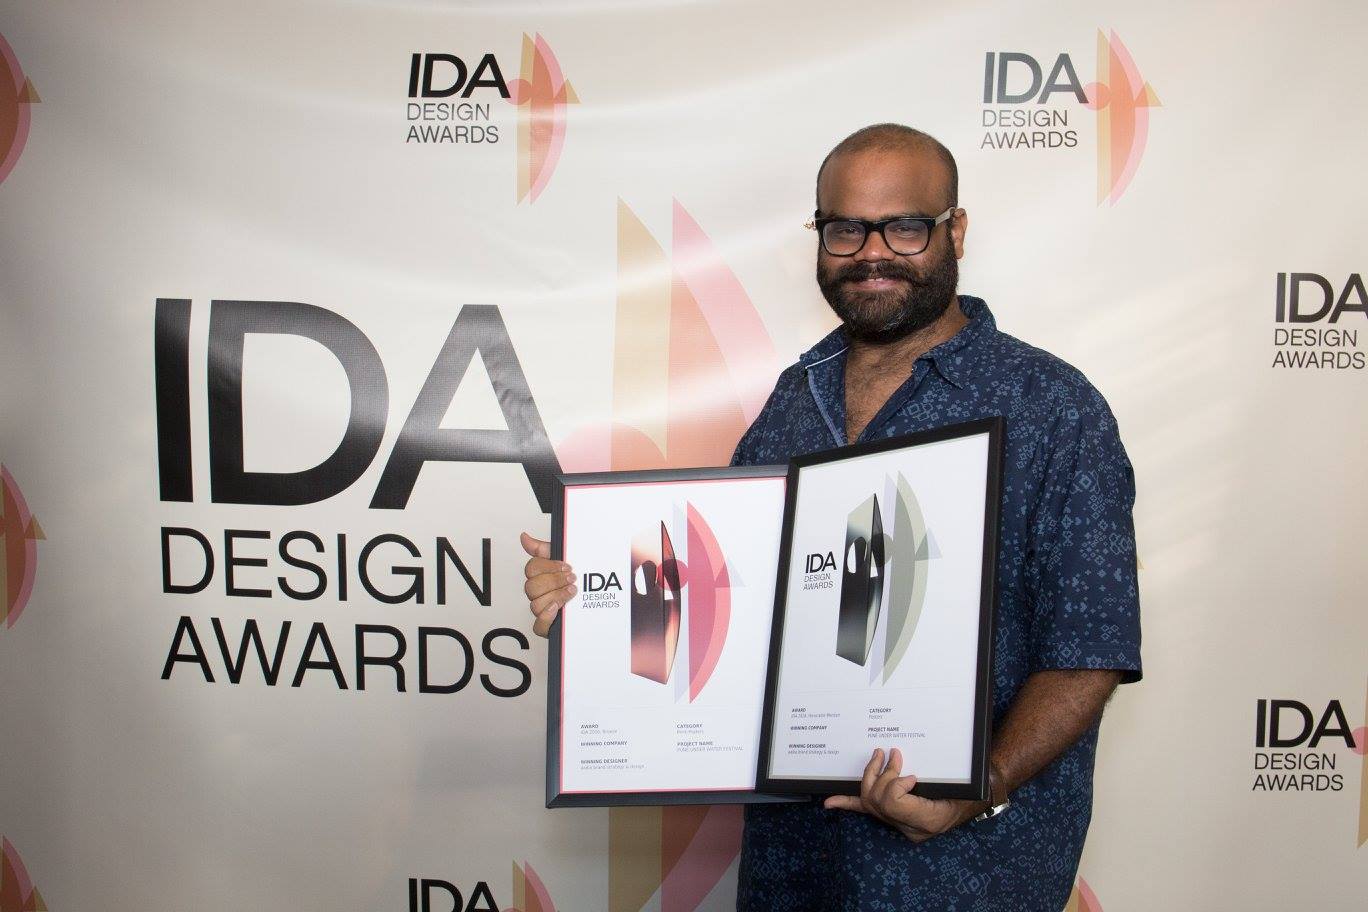 The 9th and 10th International Design Awards Winners Cocktail Event